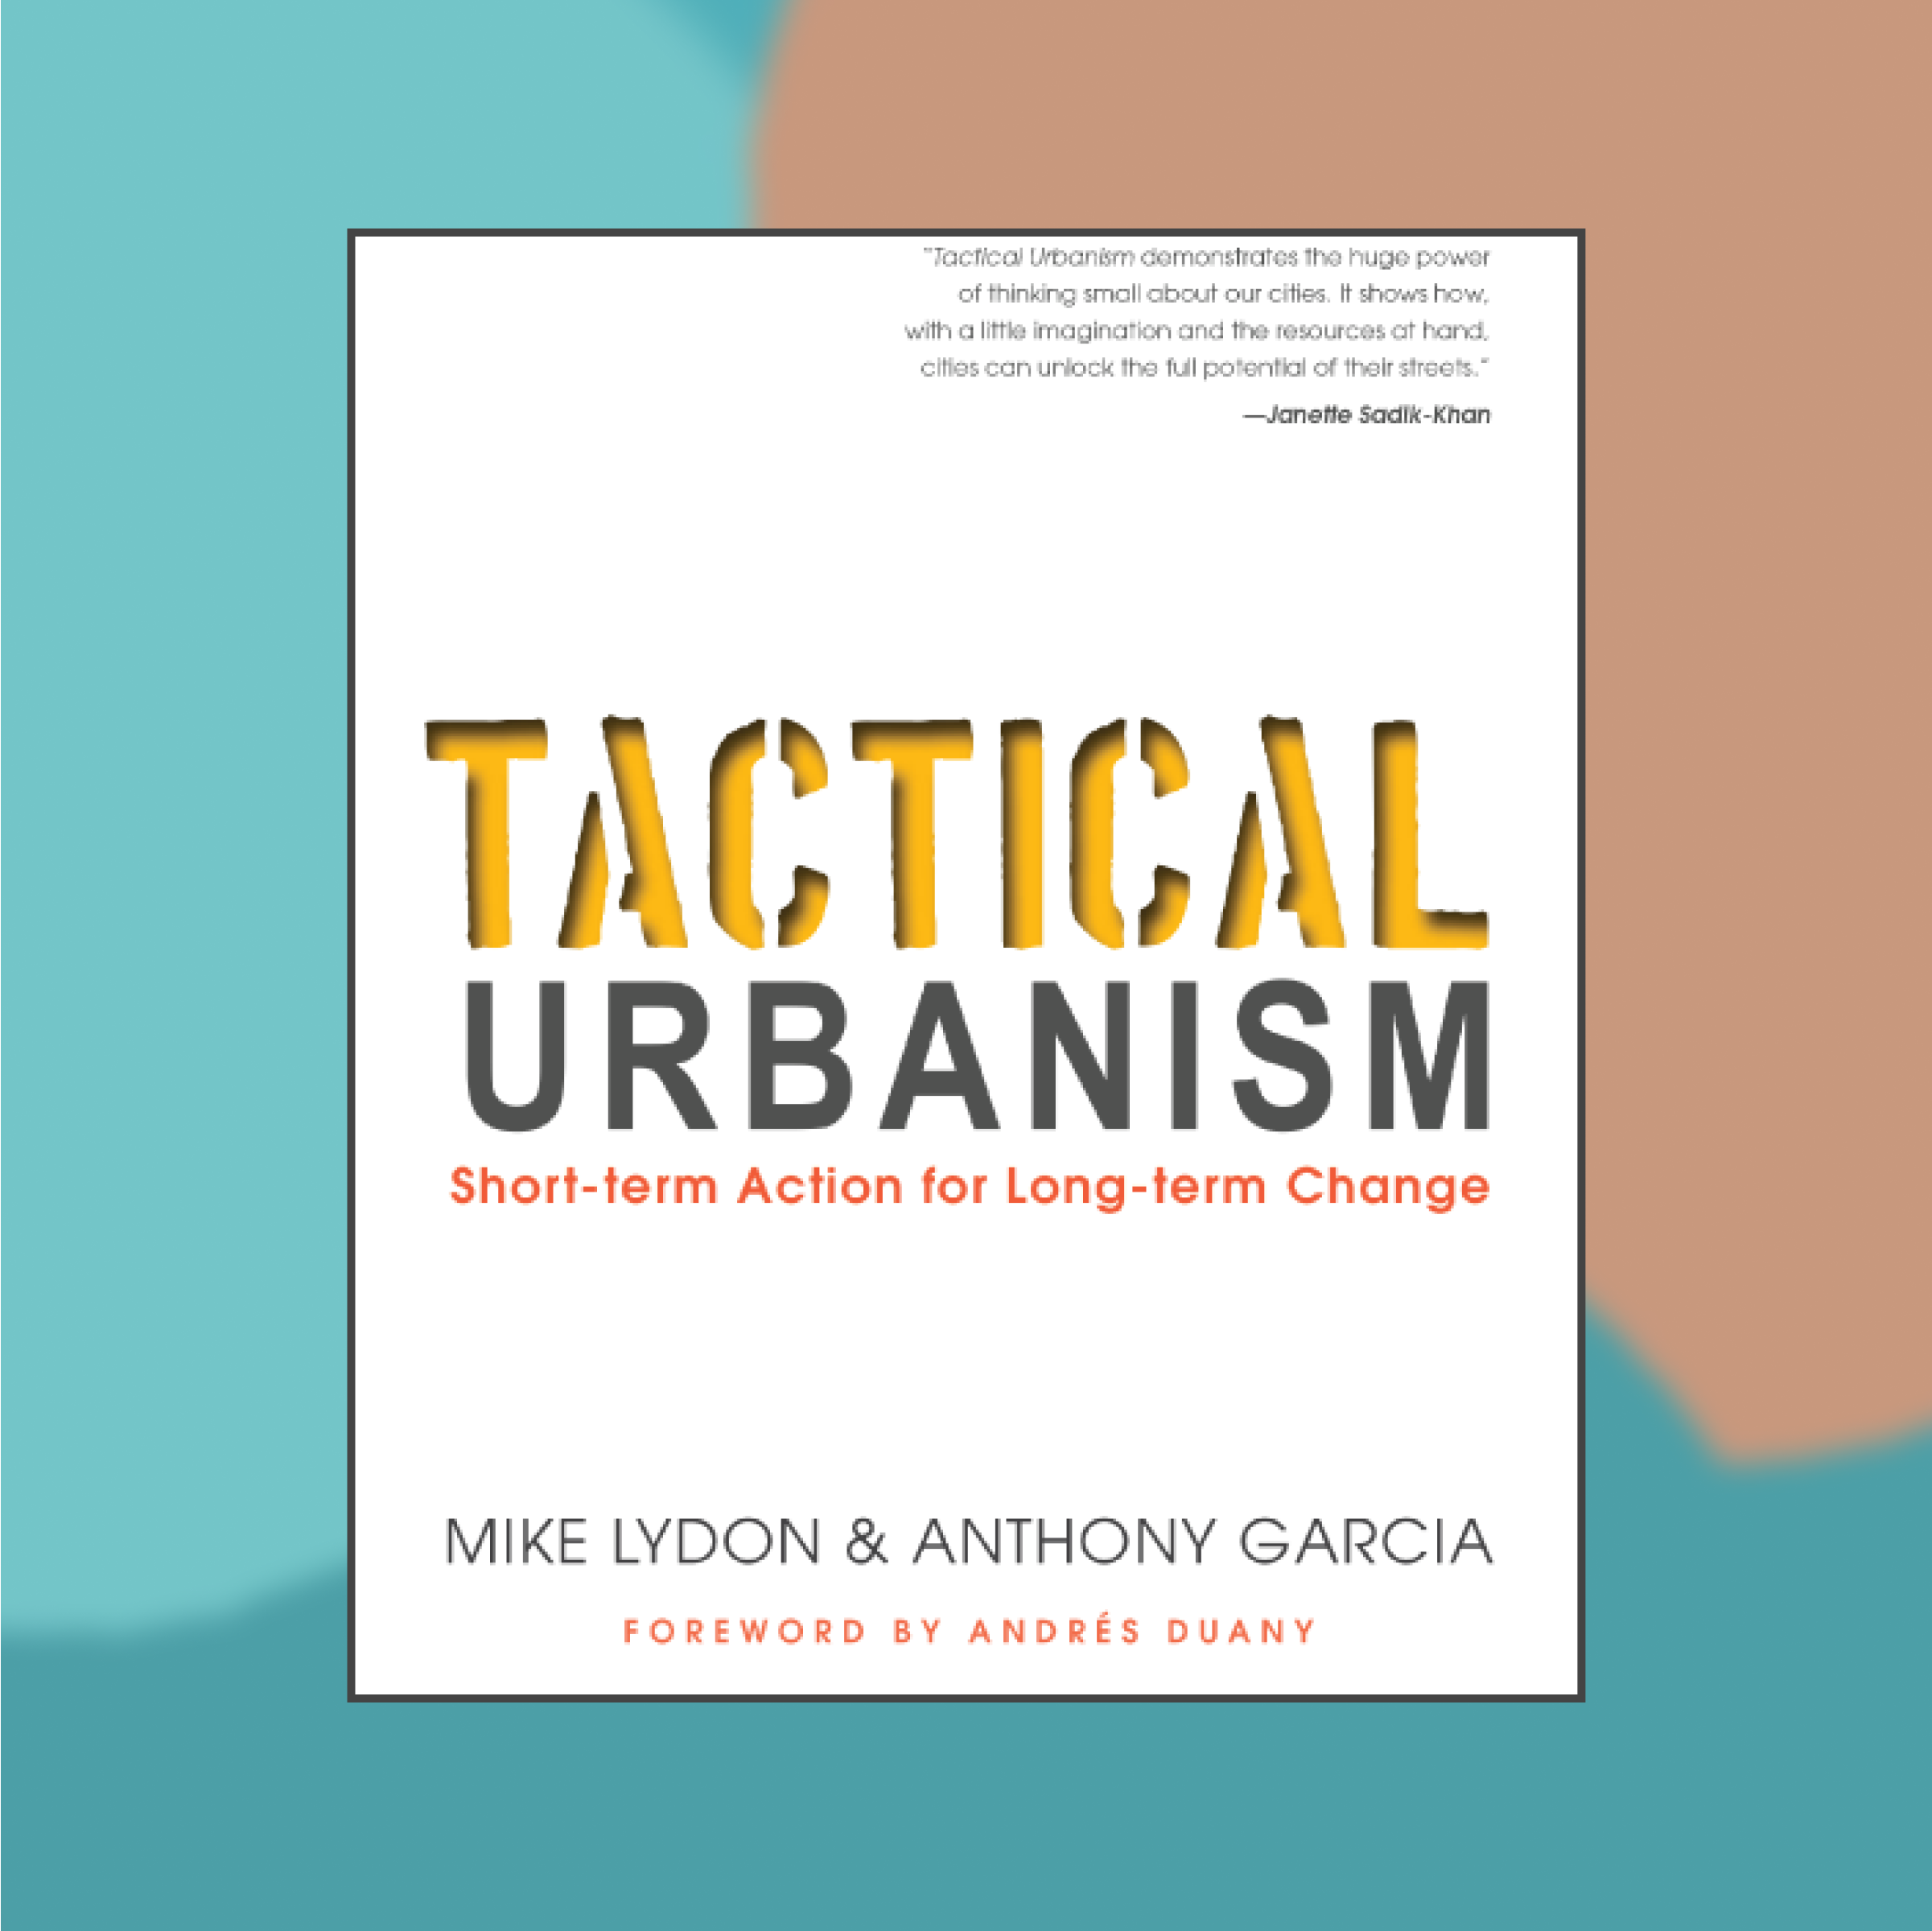 Book cover of Tactical Urbanism against an abstract painted background